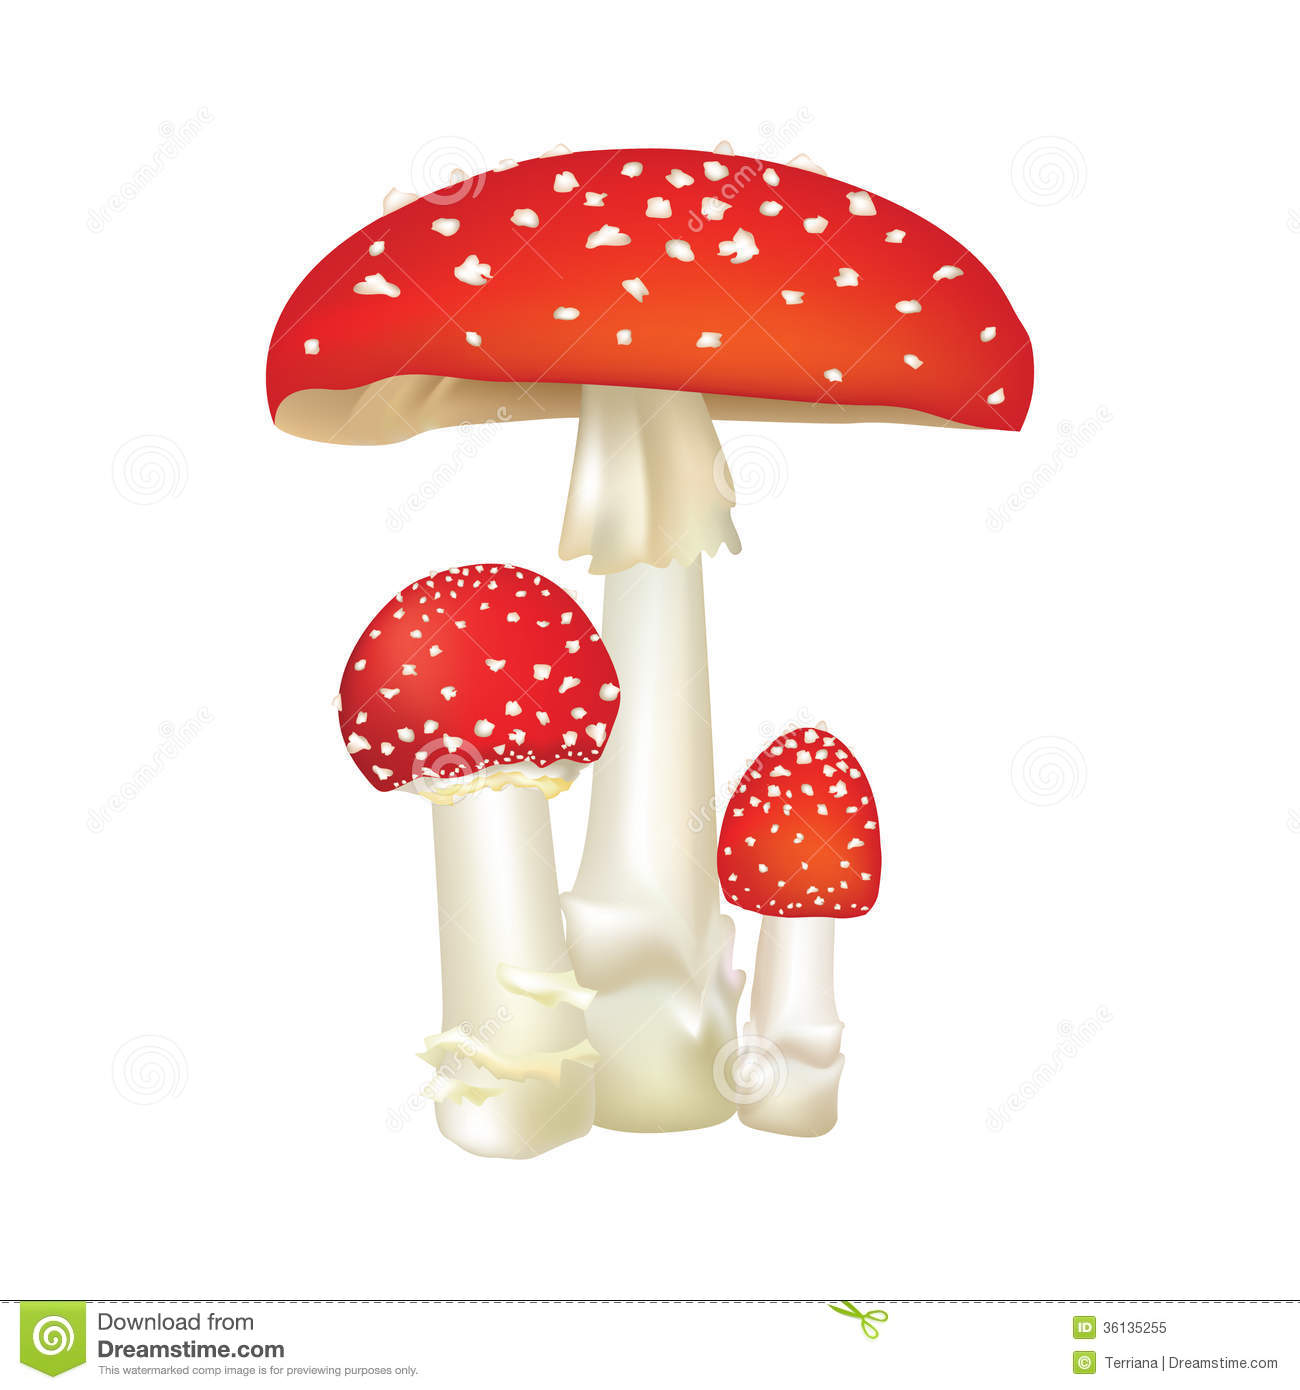 Poisonous mushroom clipart - Clipground